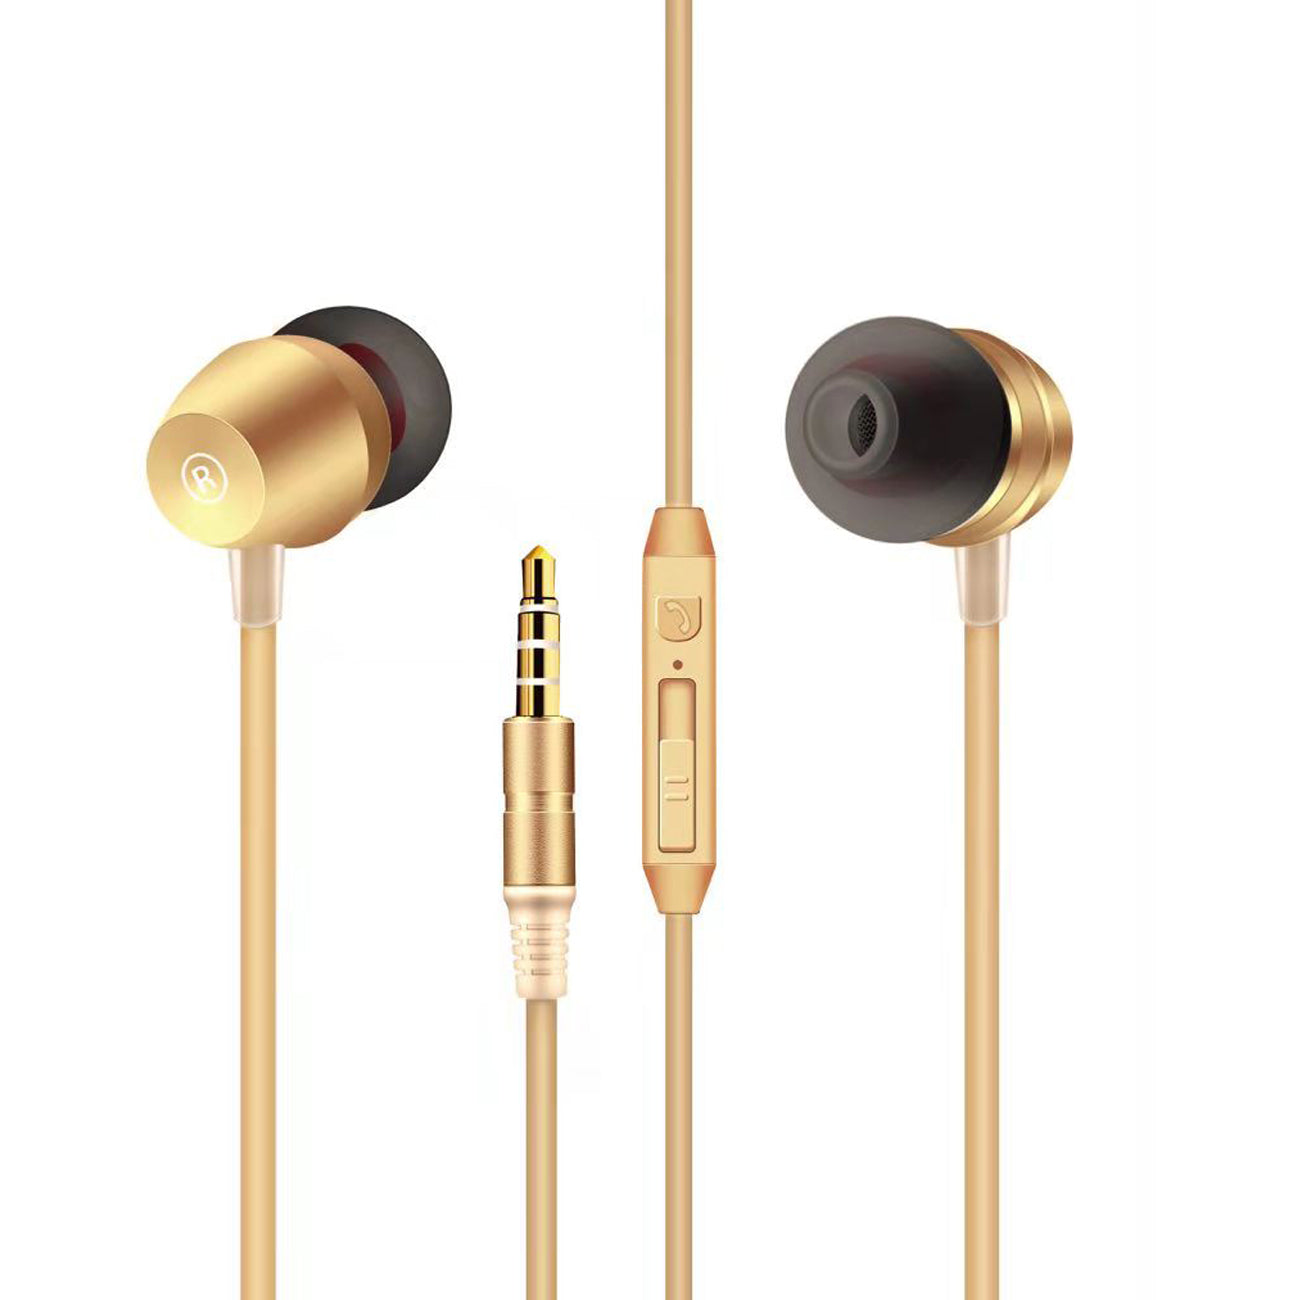 High Quality Sound Universal In-ear Earphones In Gold